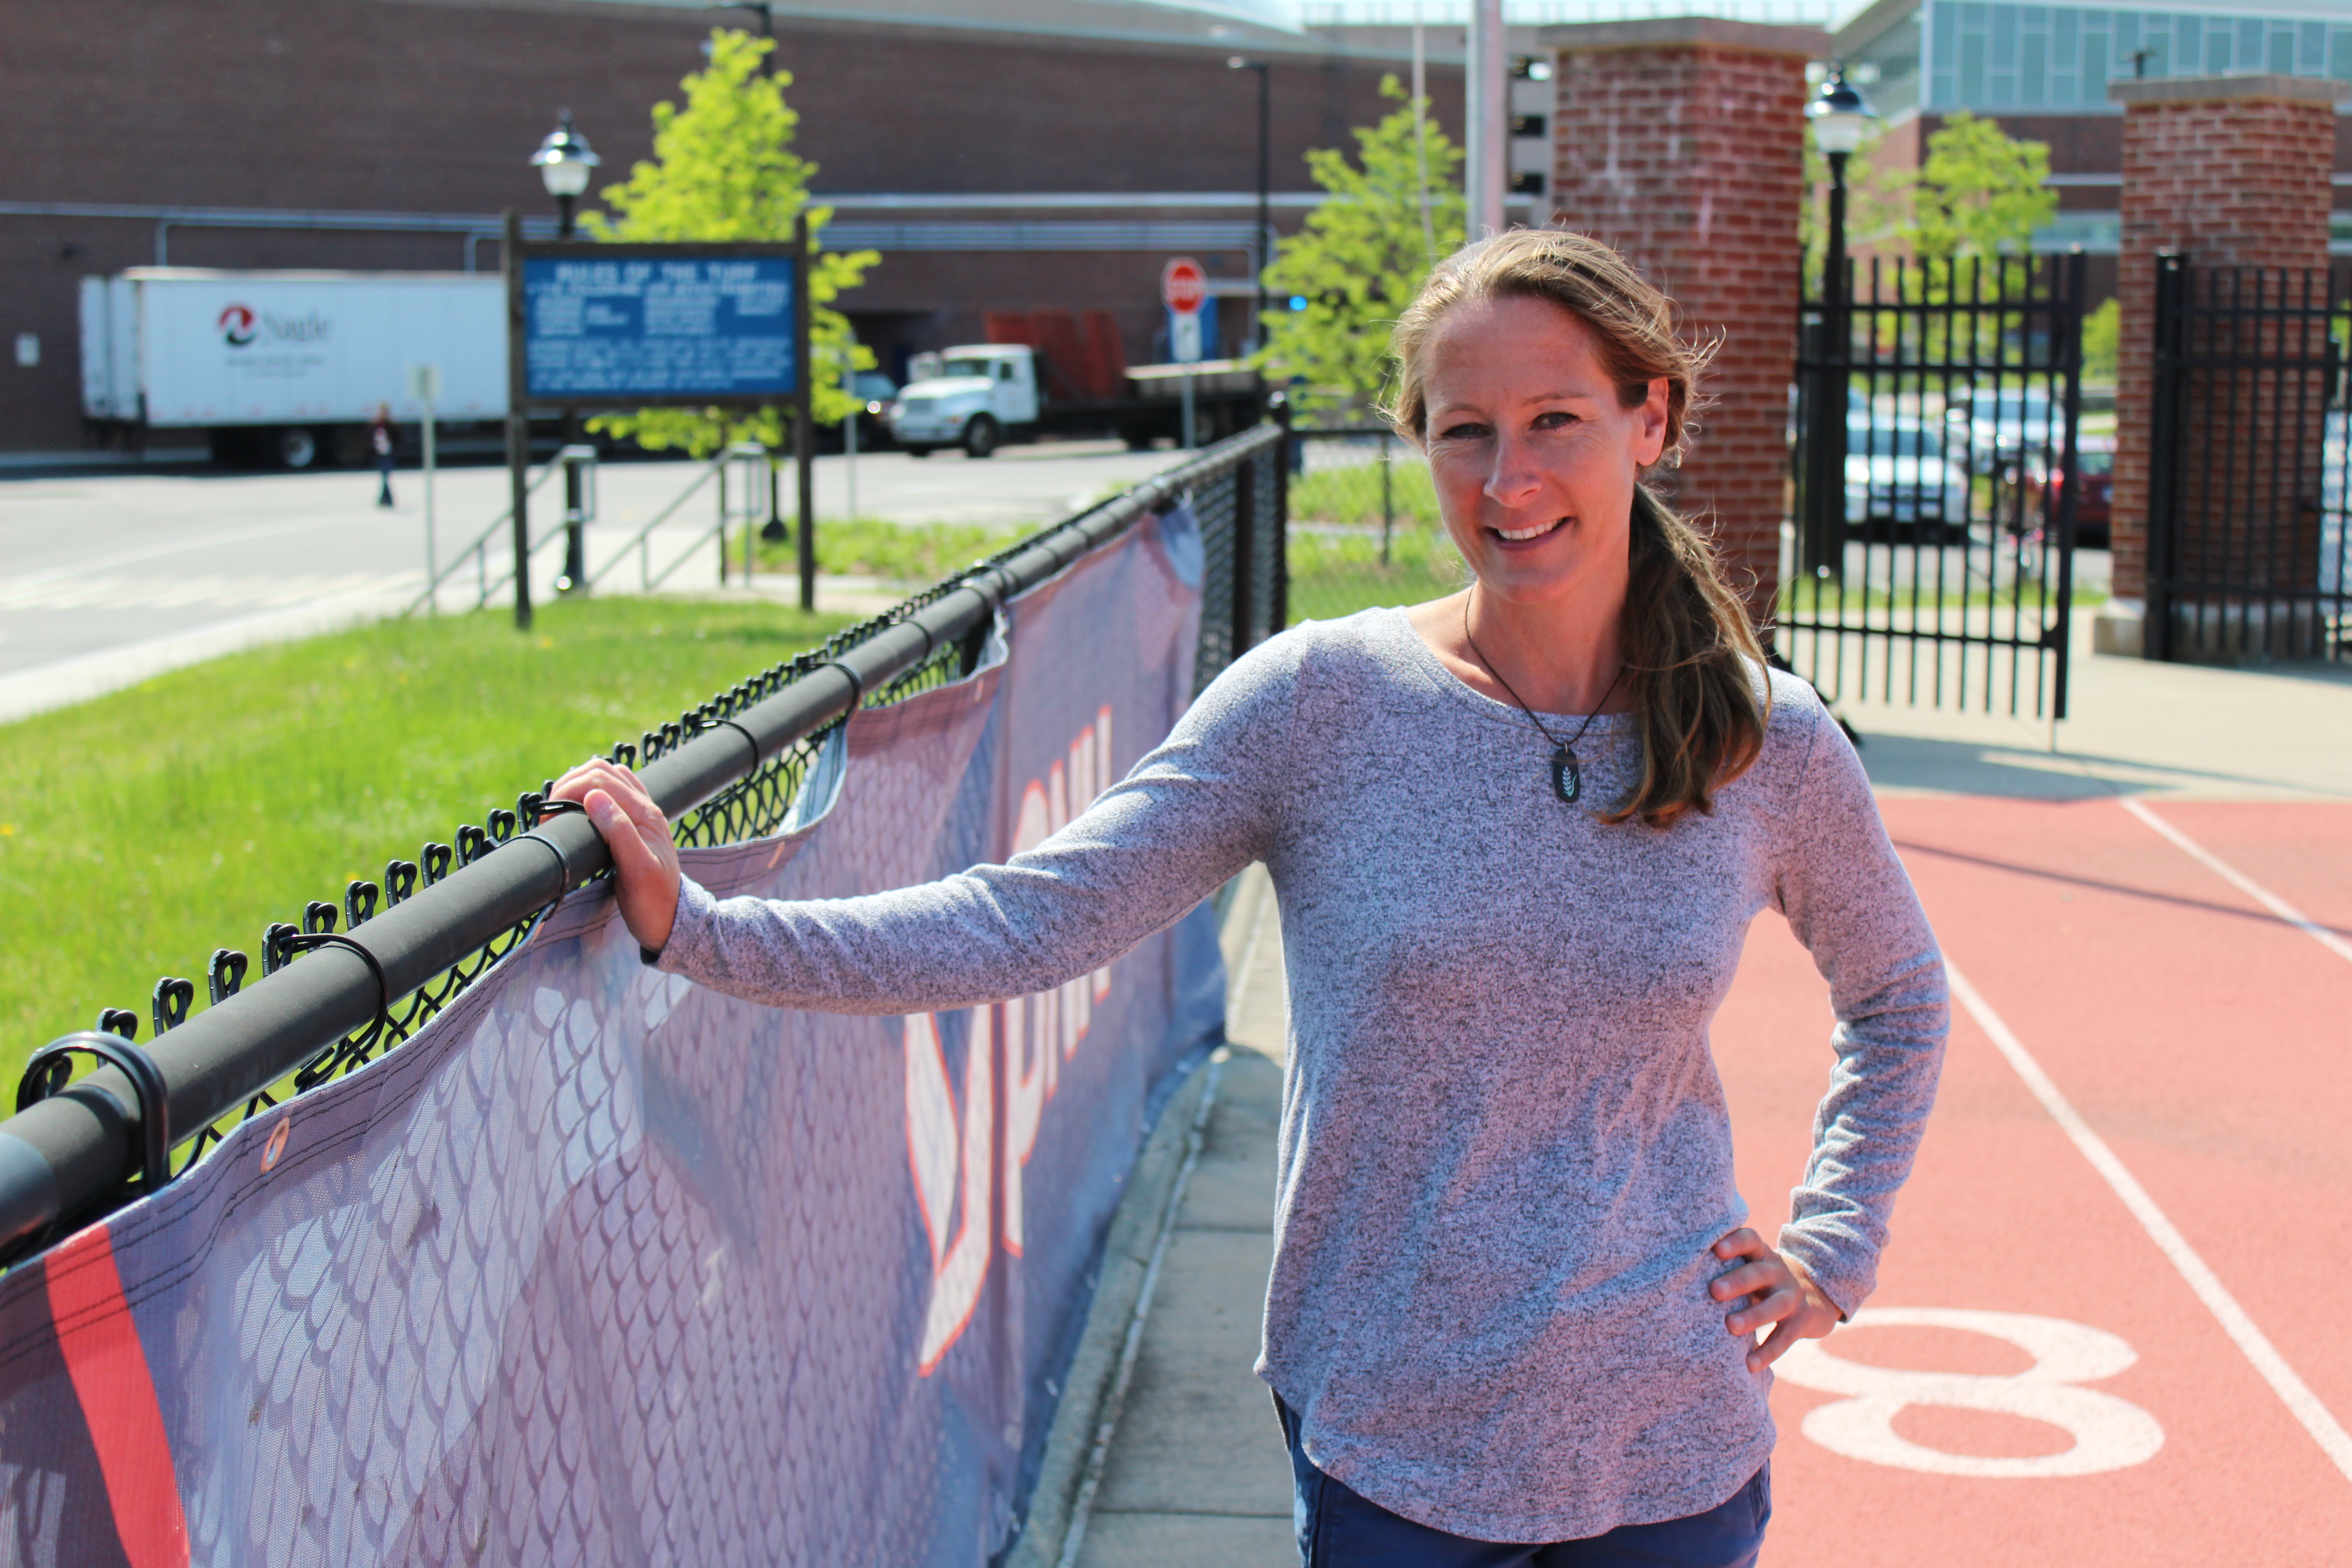 Beth Taylor, associate professor of kinesiology at UConn and director of Exercise Physiology Research in Cardiology at Hartford Hospital. (Jessica McBride/UConn Photo)